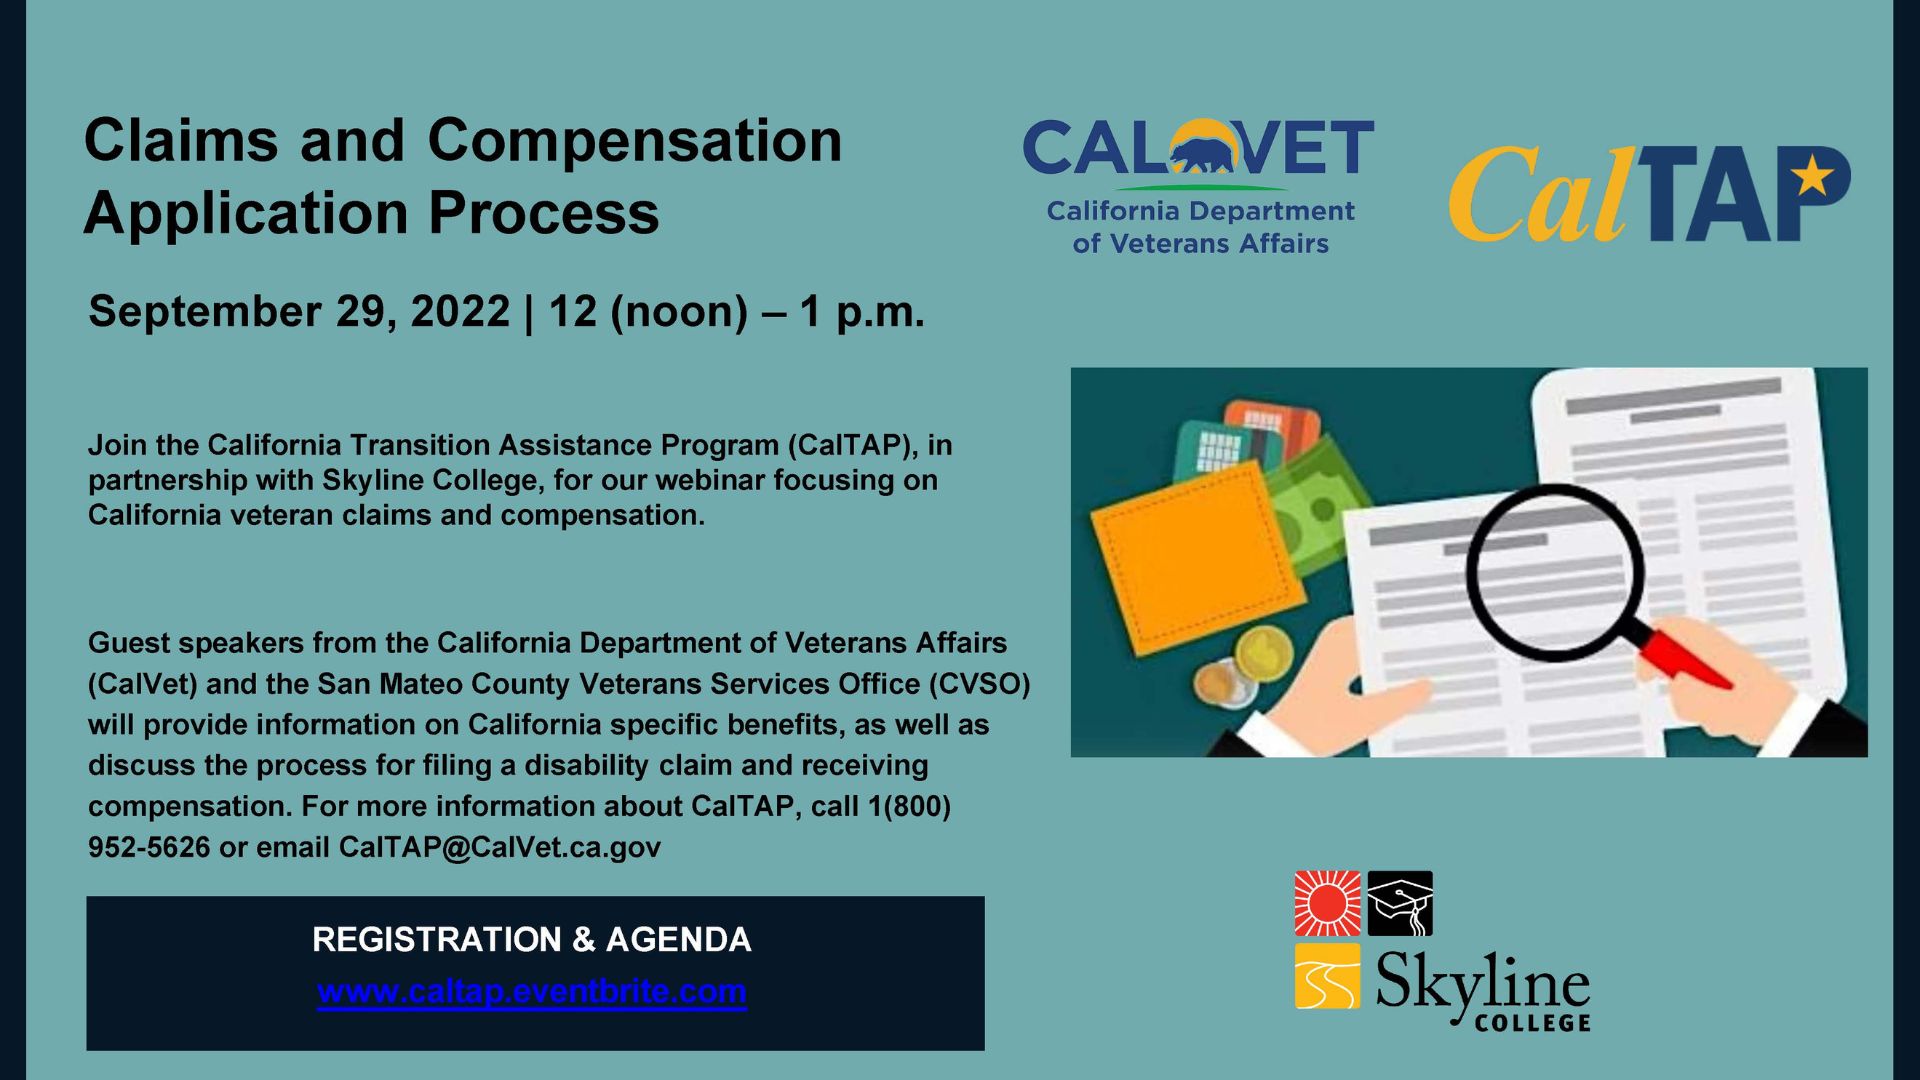 Claims and Compensation Application Process flyer